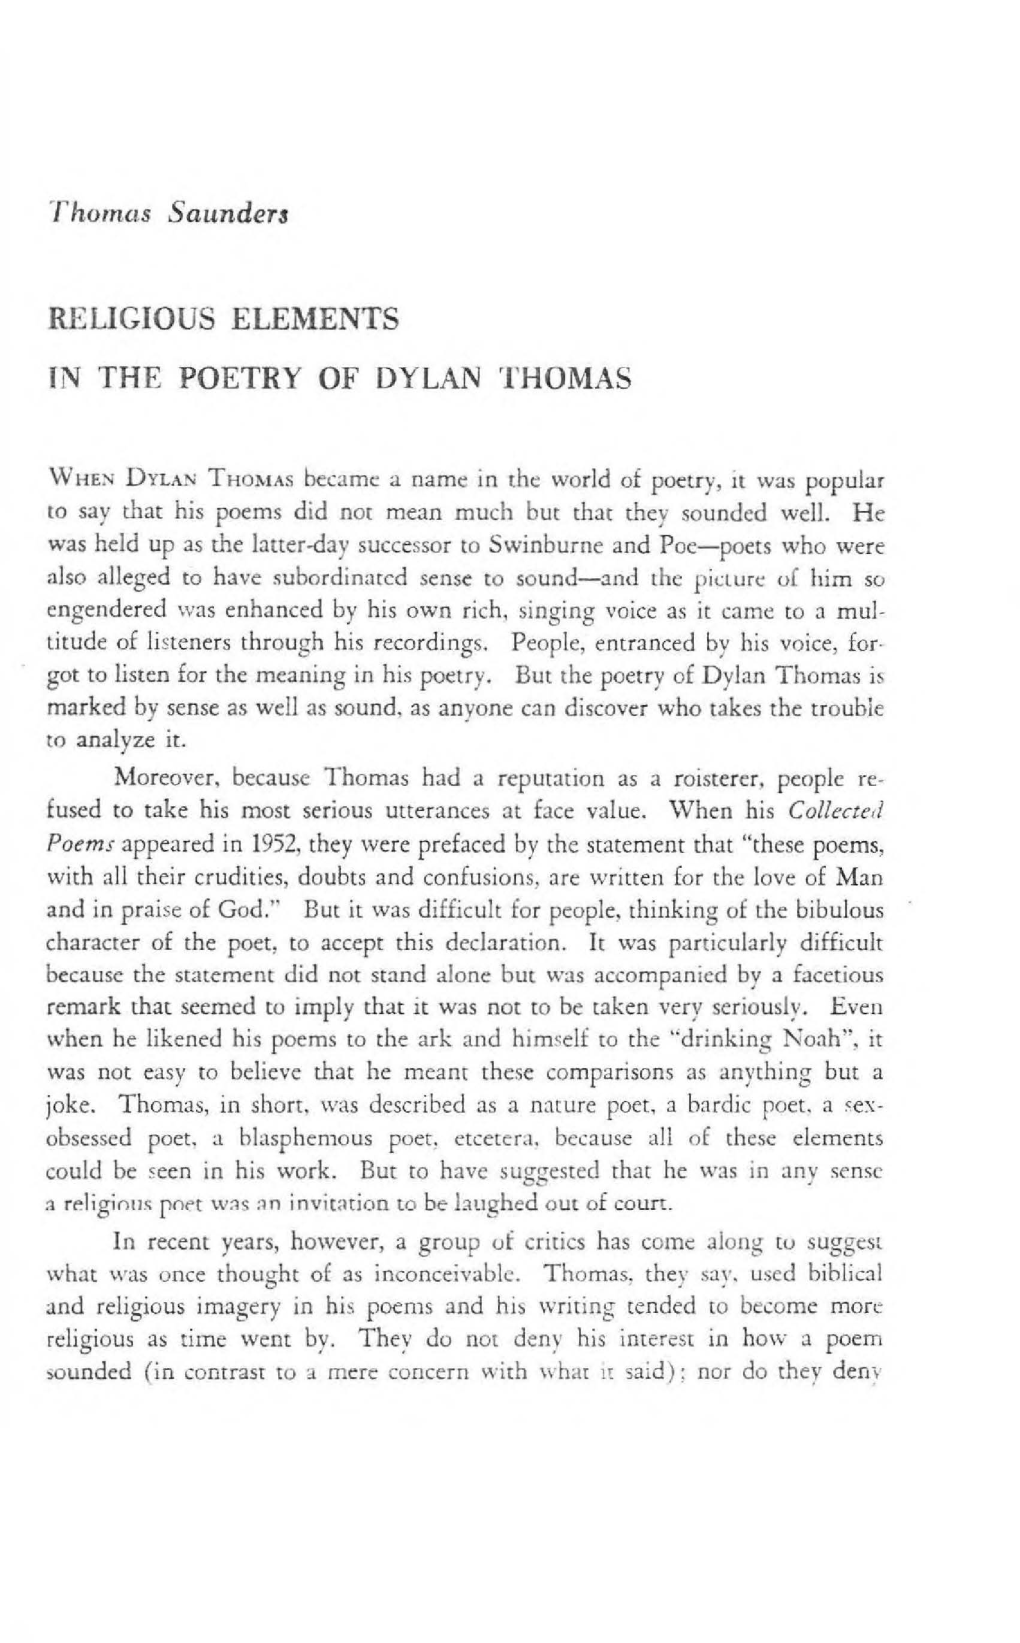 Reugious Elements in the Poetry of Dylan Thomas